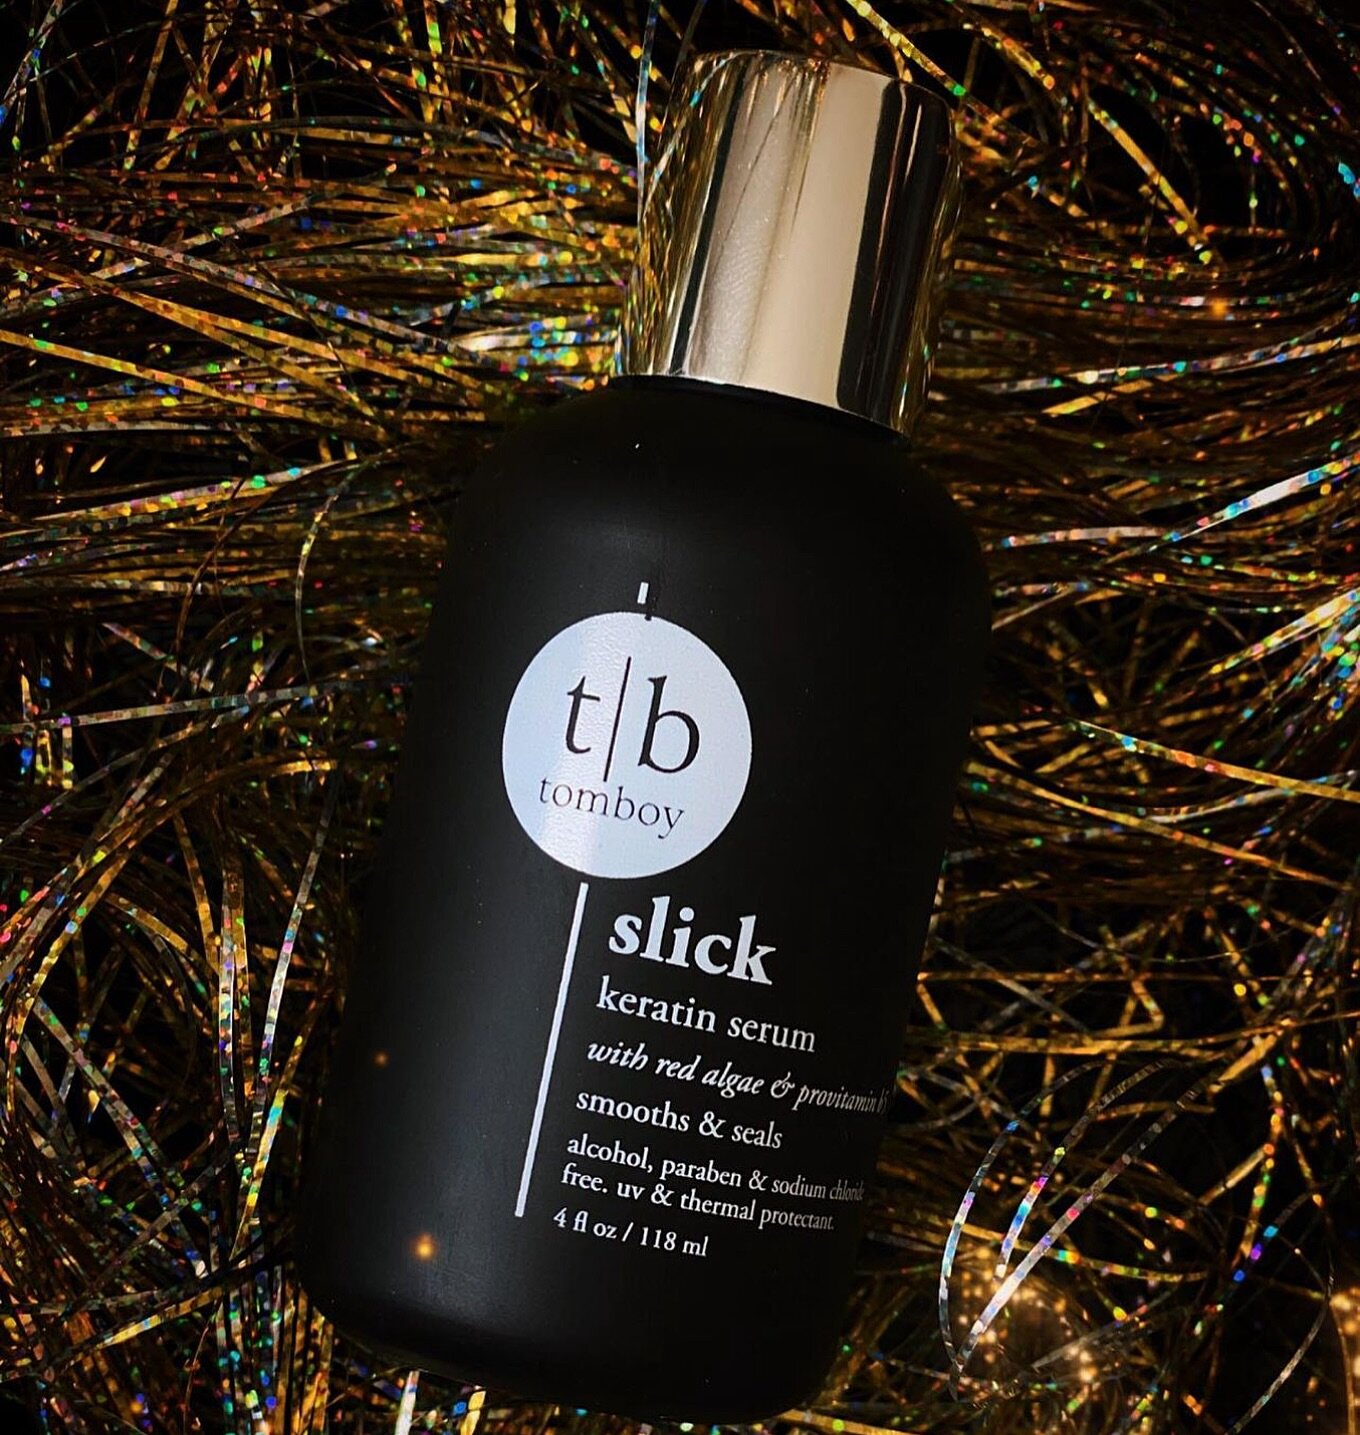 Deck the halls with....Slick Keratin Serum 🎄 it&rsquo;s not too early to start your holiday shopping with @tomboyhaircare! Shop online at www.tomboyhaircare.com